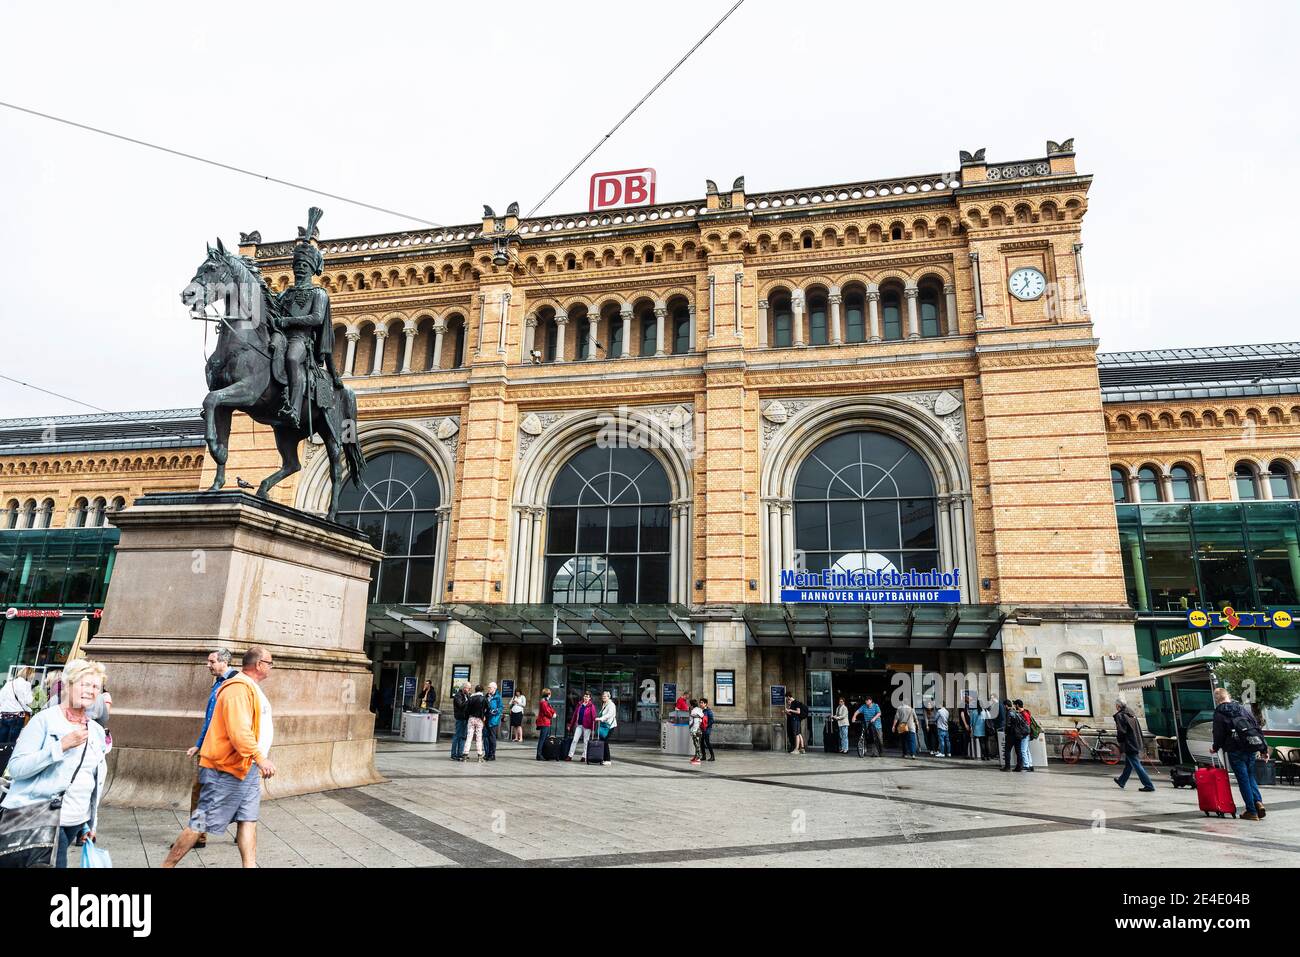 Hanover, Germany - August 18, 2019: Equestrian statue of the Ernst August von Hannover in front of the Hauptbahnhof station with people around in Hano Stock Photo